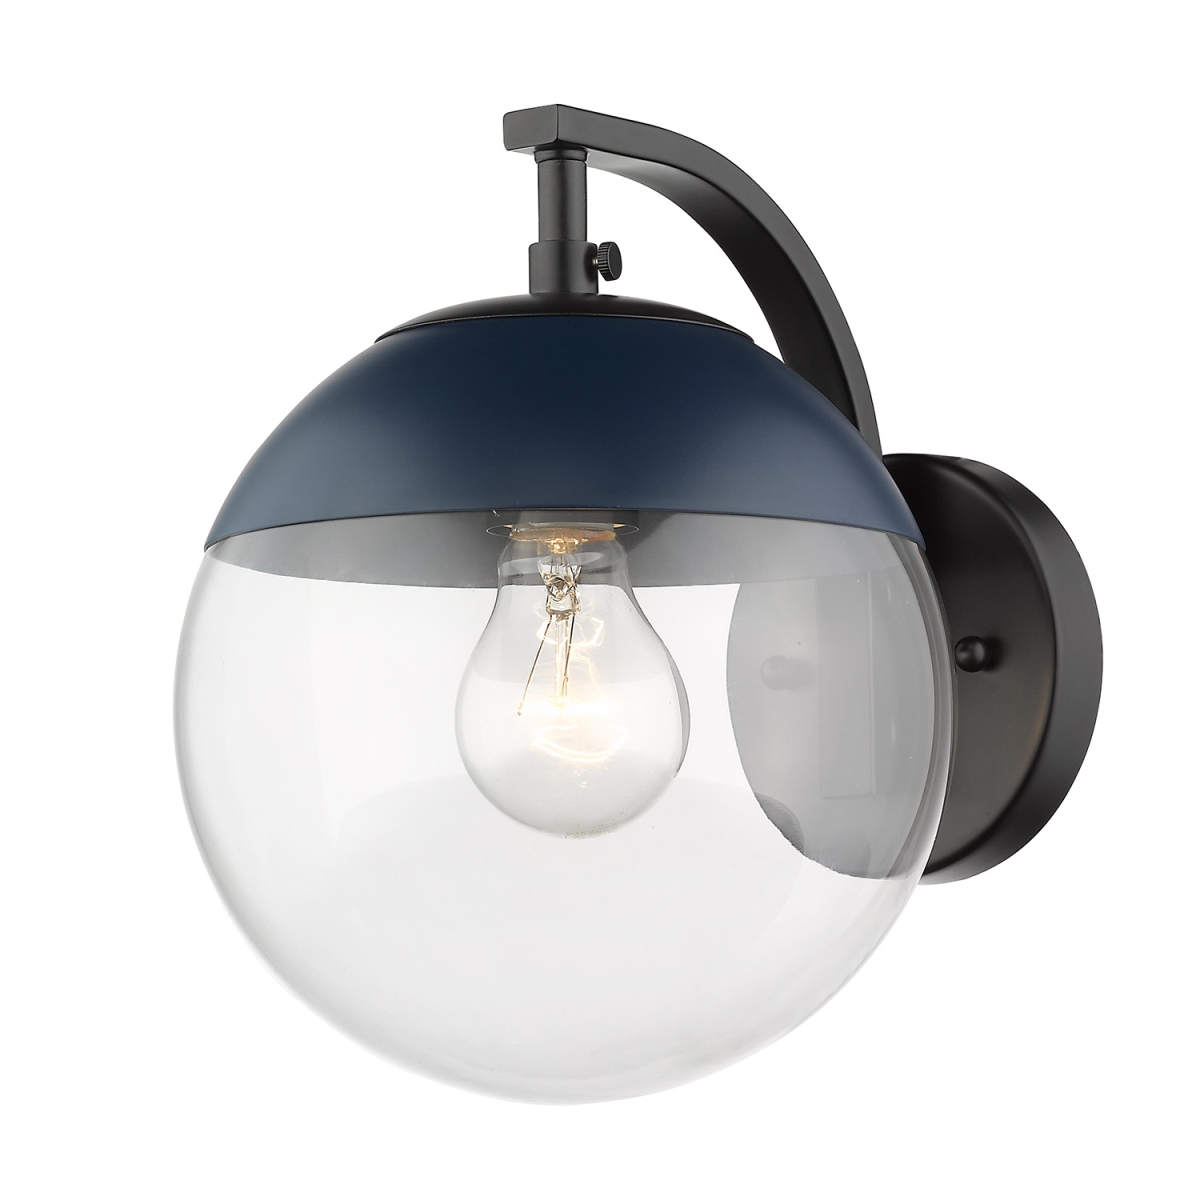 3219-1w Blk-mnvy Dixon Sconce Light With Clear Glass & Navy Cap, Black